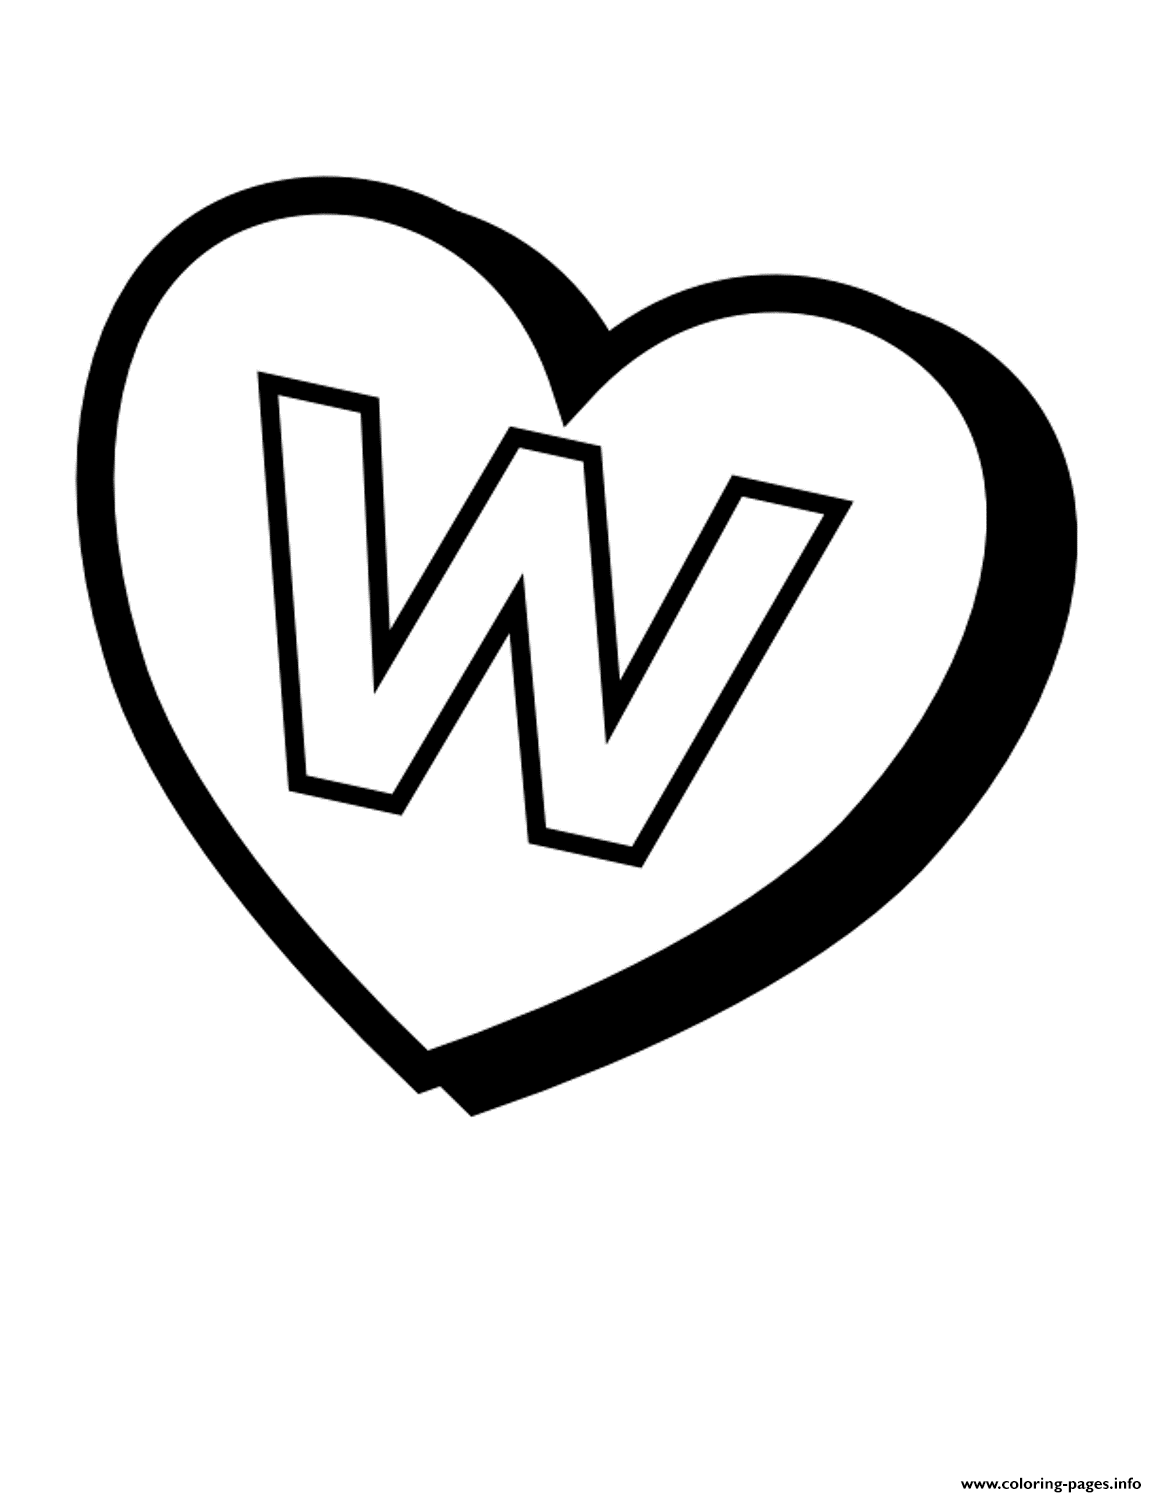 Heart Of W Free Alphabet S6df8 coloring